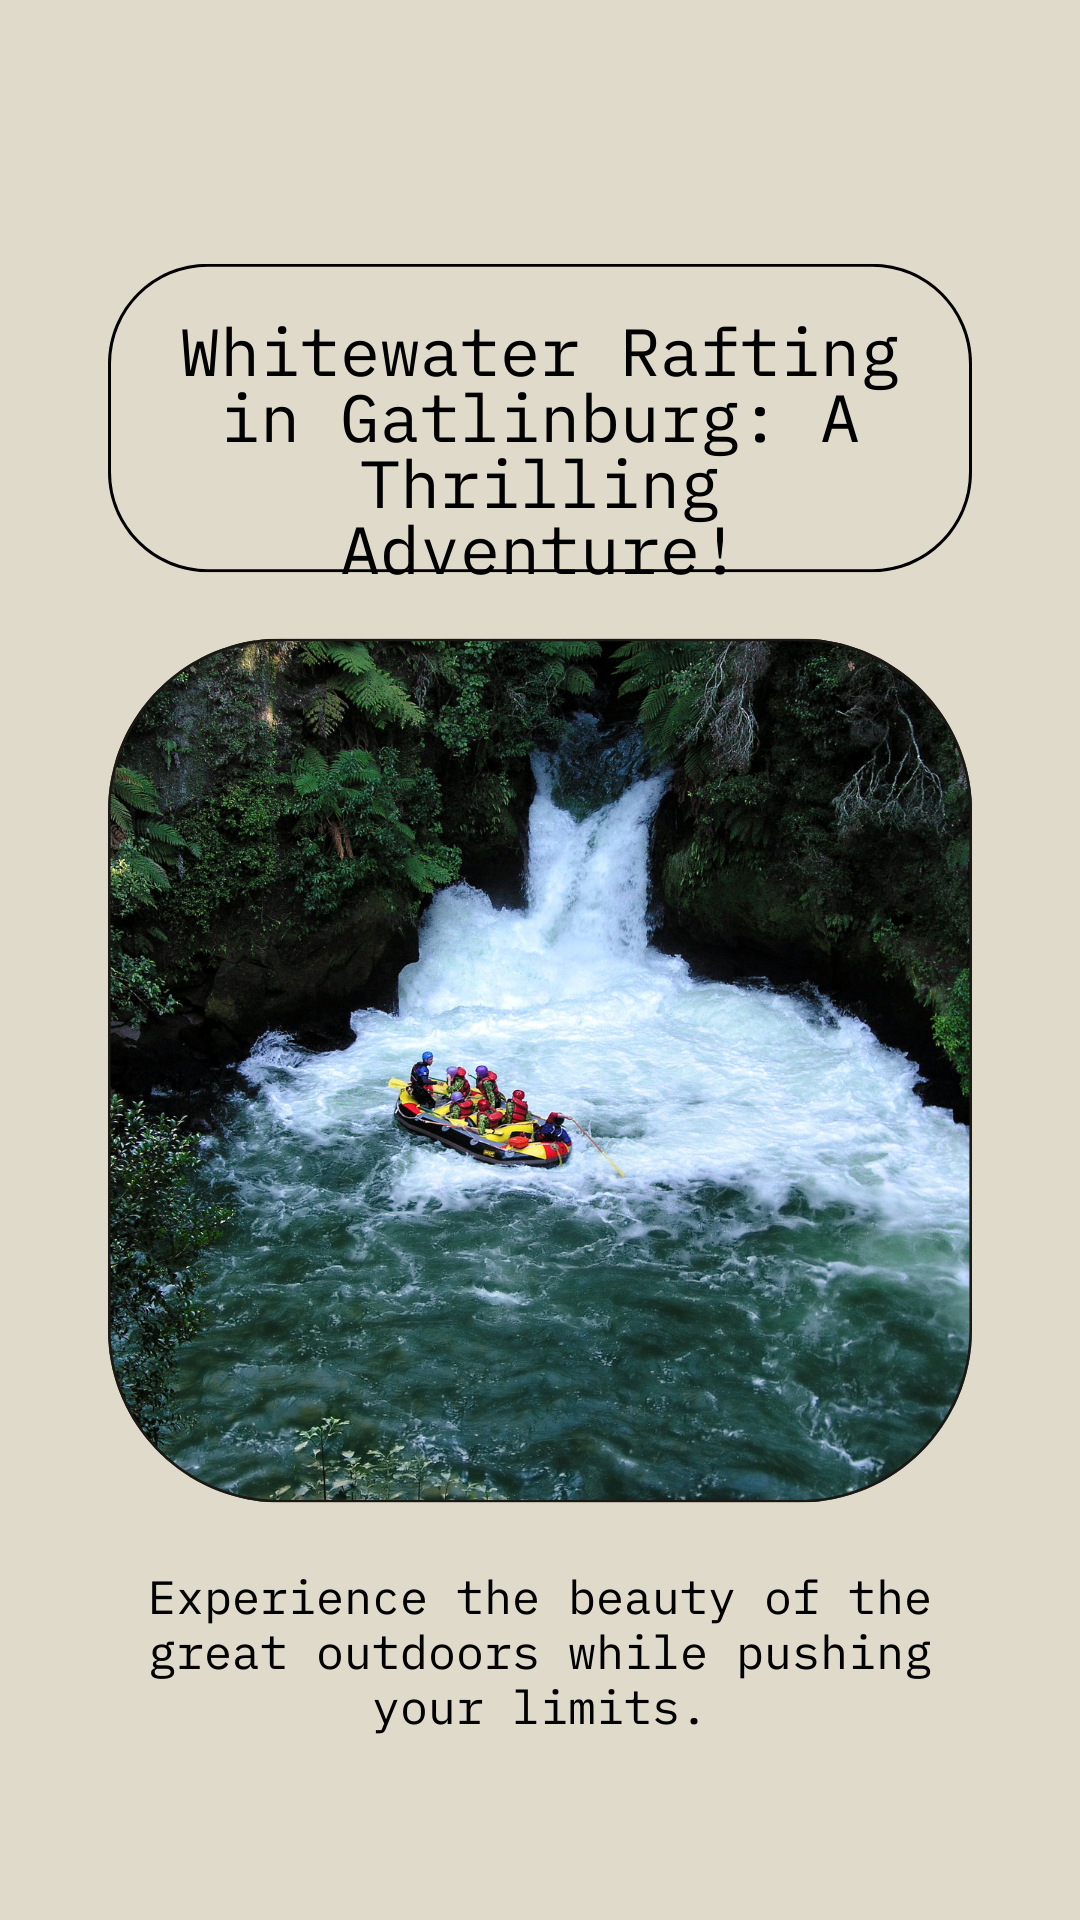 Whitewater Rafting in Gatlinburg: A Thrill-Seeker's Guide with Grinning Gary